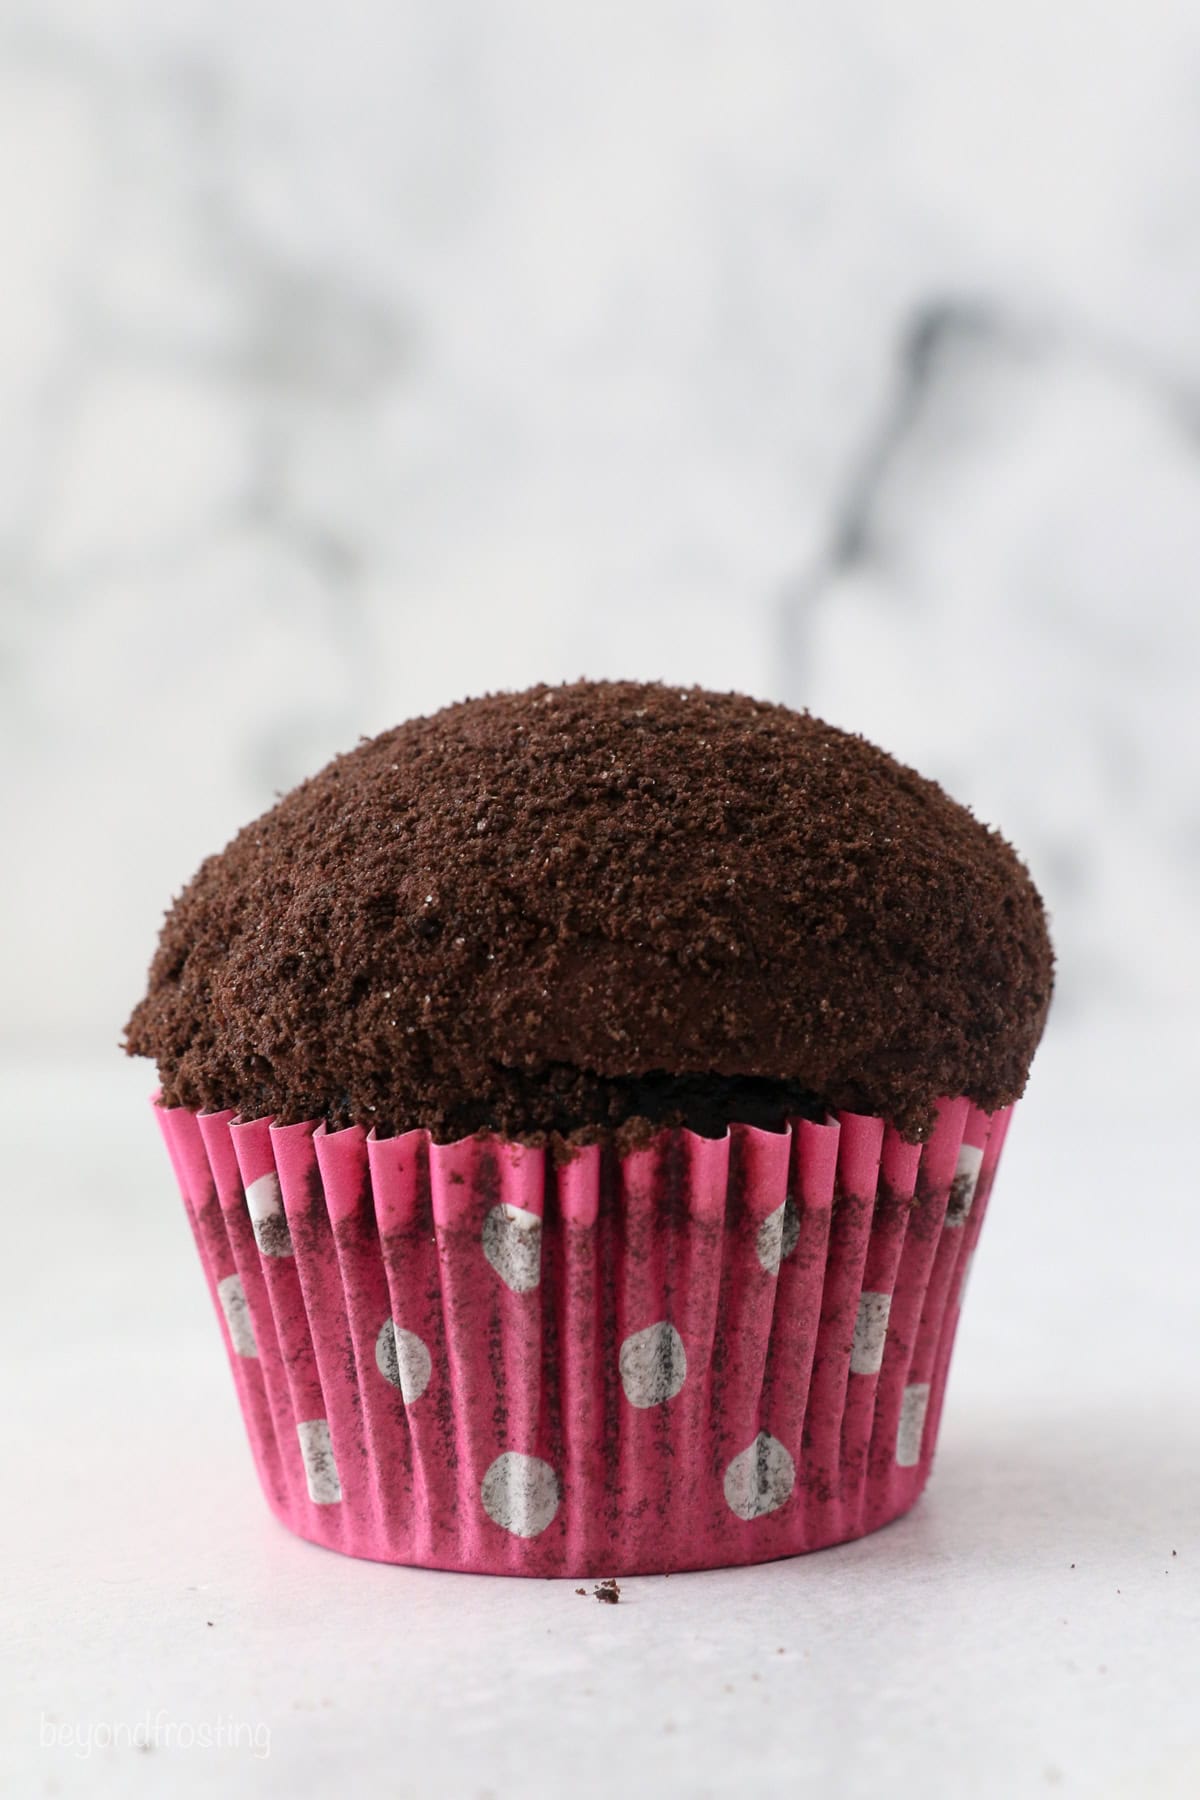 A frosted cupcake coated with Oreo crumbs inside a pink and white polka-dot cupcake liner.